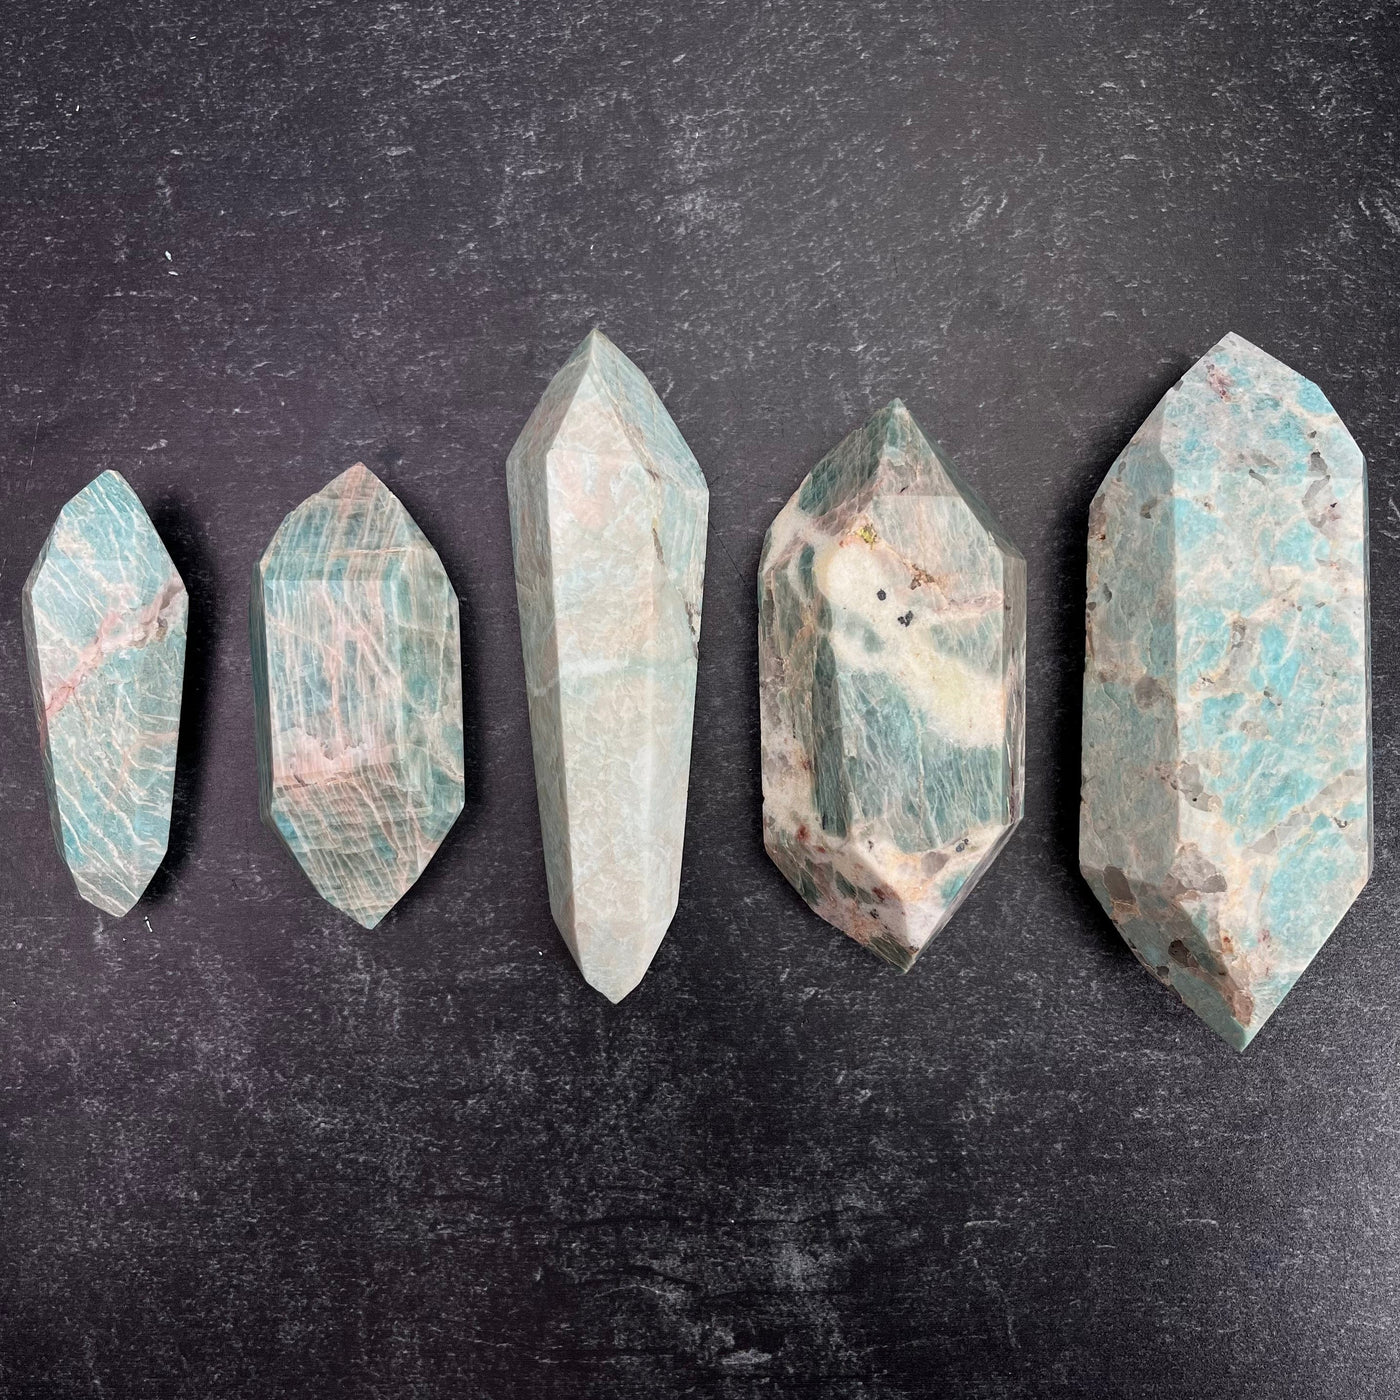 Five different weight options available of the Amazonite Polished Double Terminated Points. One of each displayed from smallest to largest, left to right on a black surface.